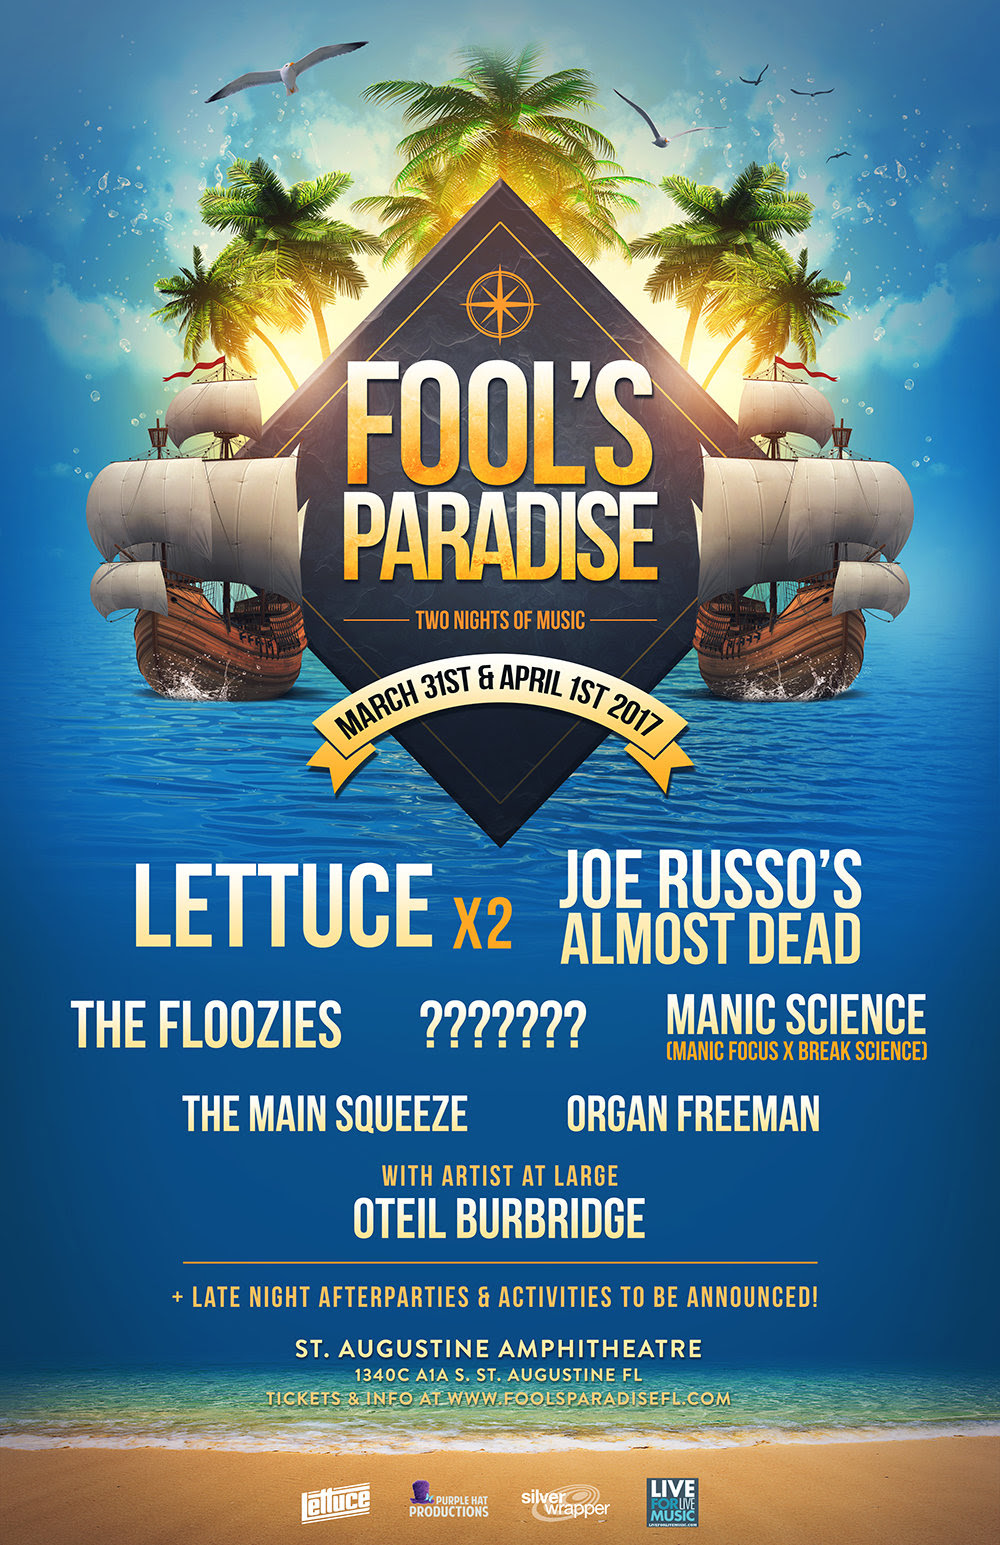 Fool's Paradise 2017 lineup. The music event will take place in St. Augustine, Florida. Photo provided.